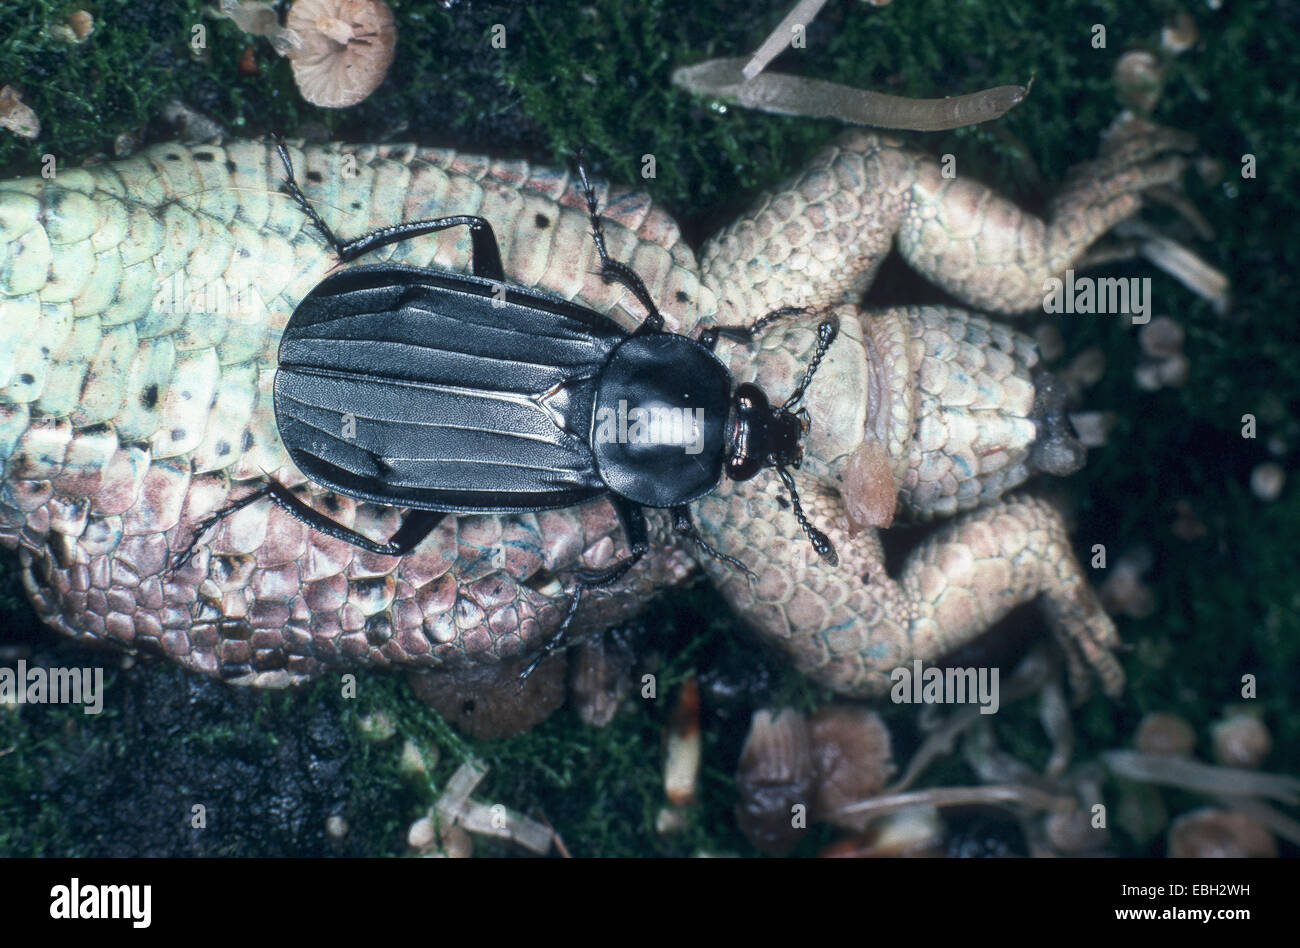 burying beetle (Necrodes littoralis), feeding at a dead reptil. Stock Photo